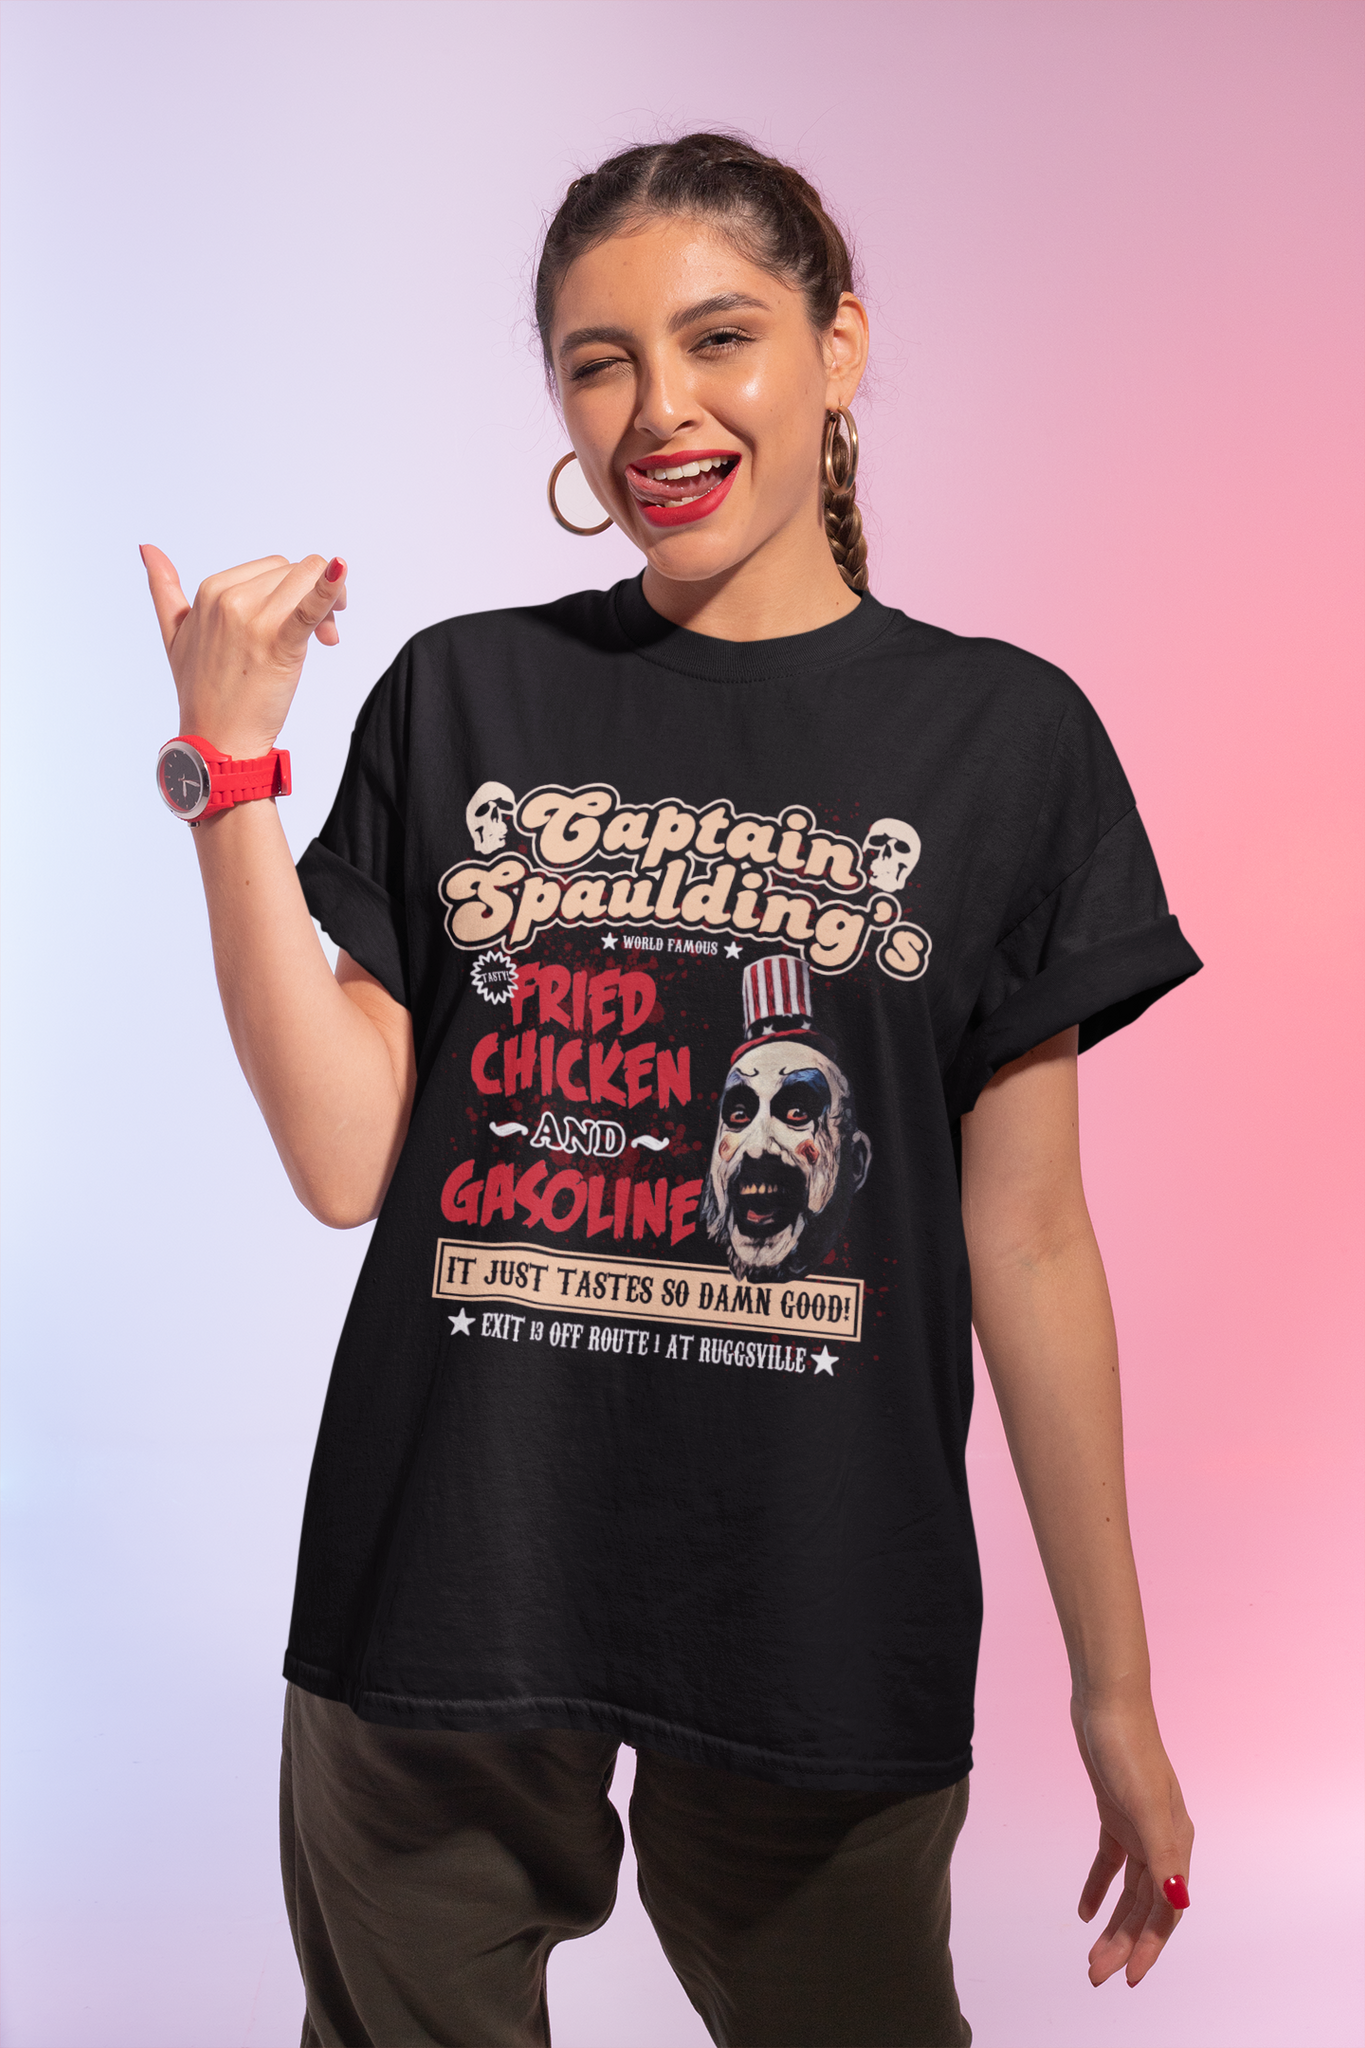 House Of 1000 Corpses T Shirt, Fried Chicken And Gasoline Tshirt, Captain Spaulding T Shirt, Halloween Gifts